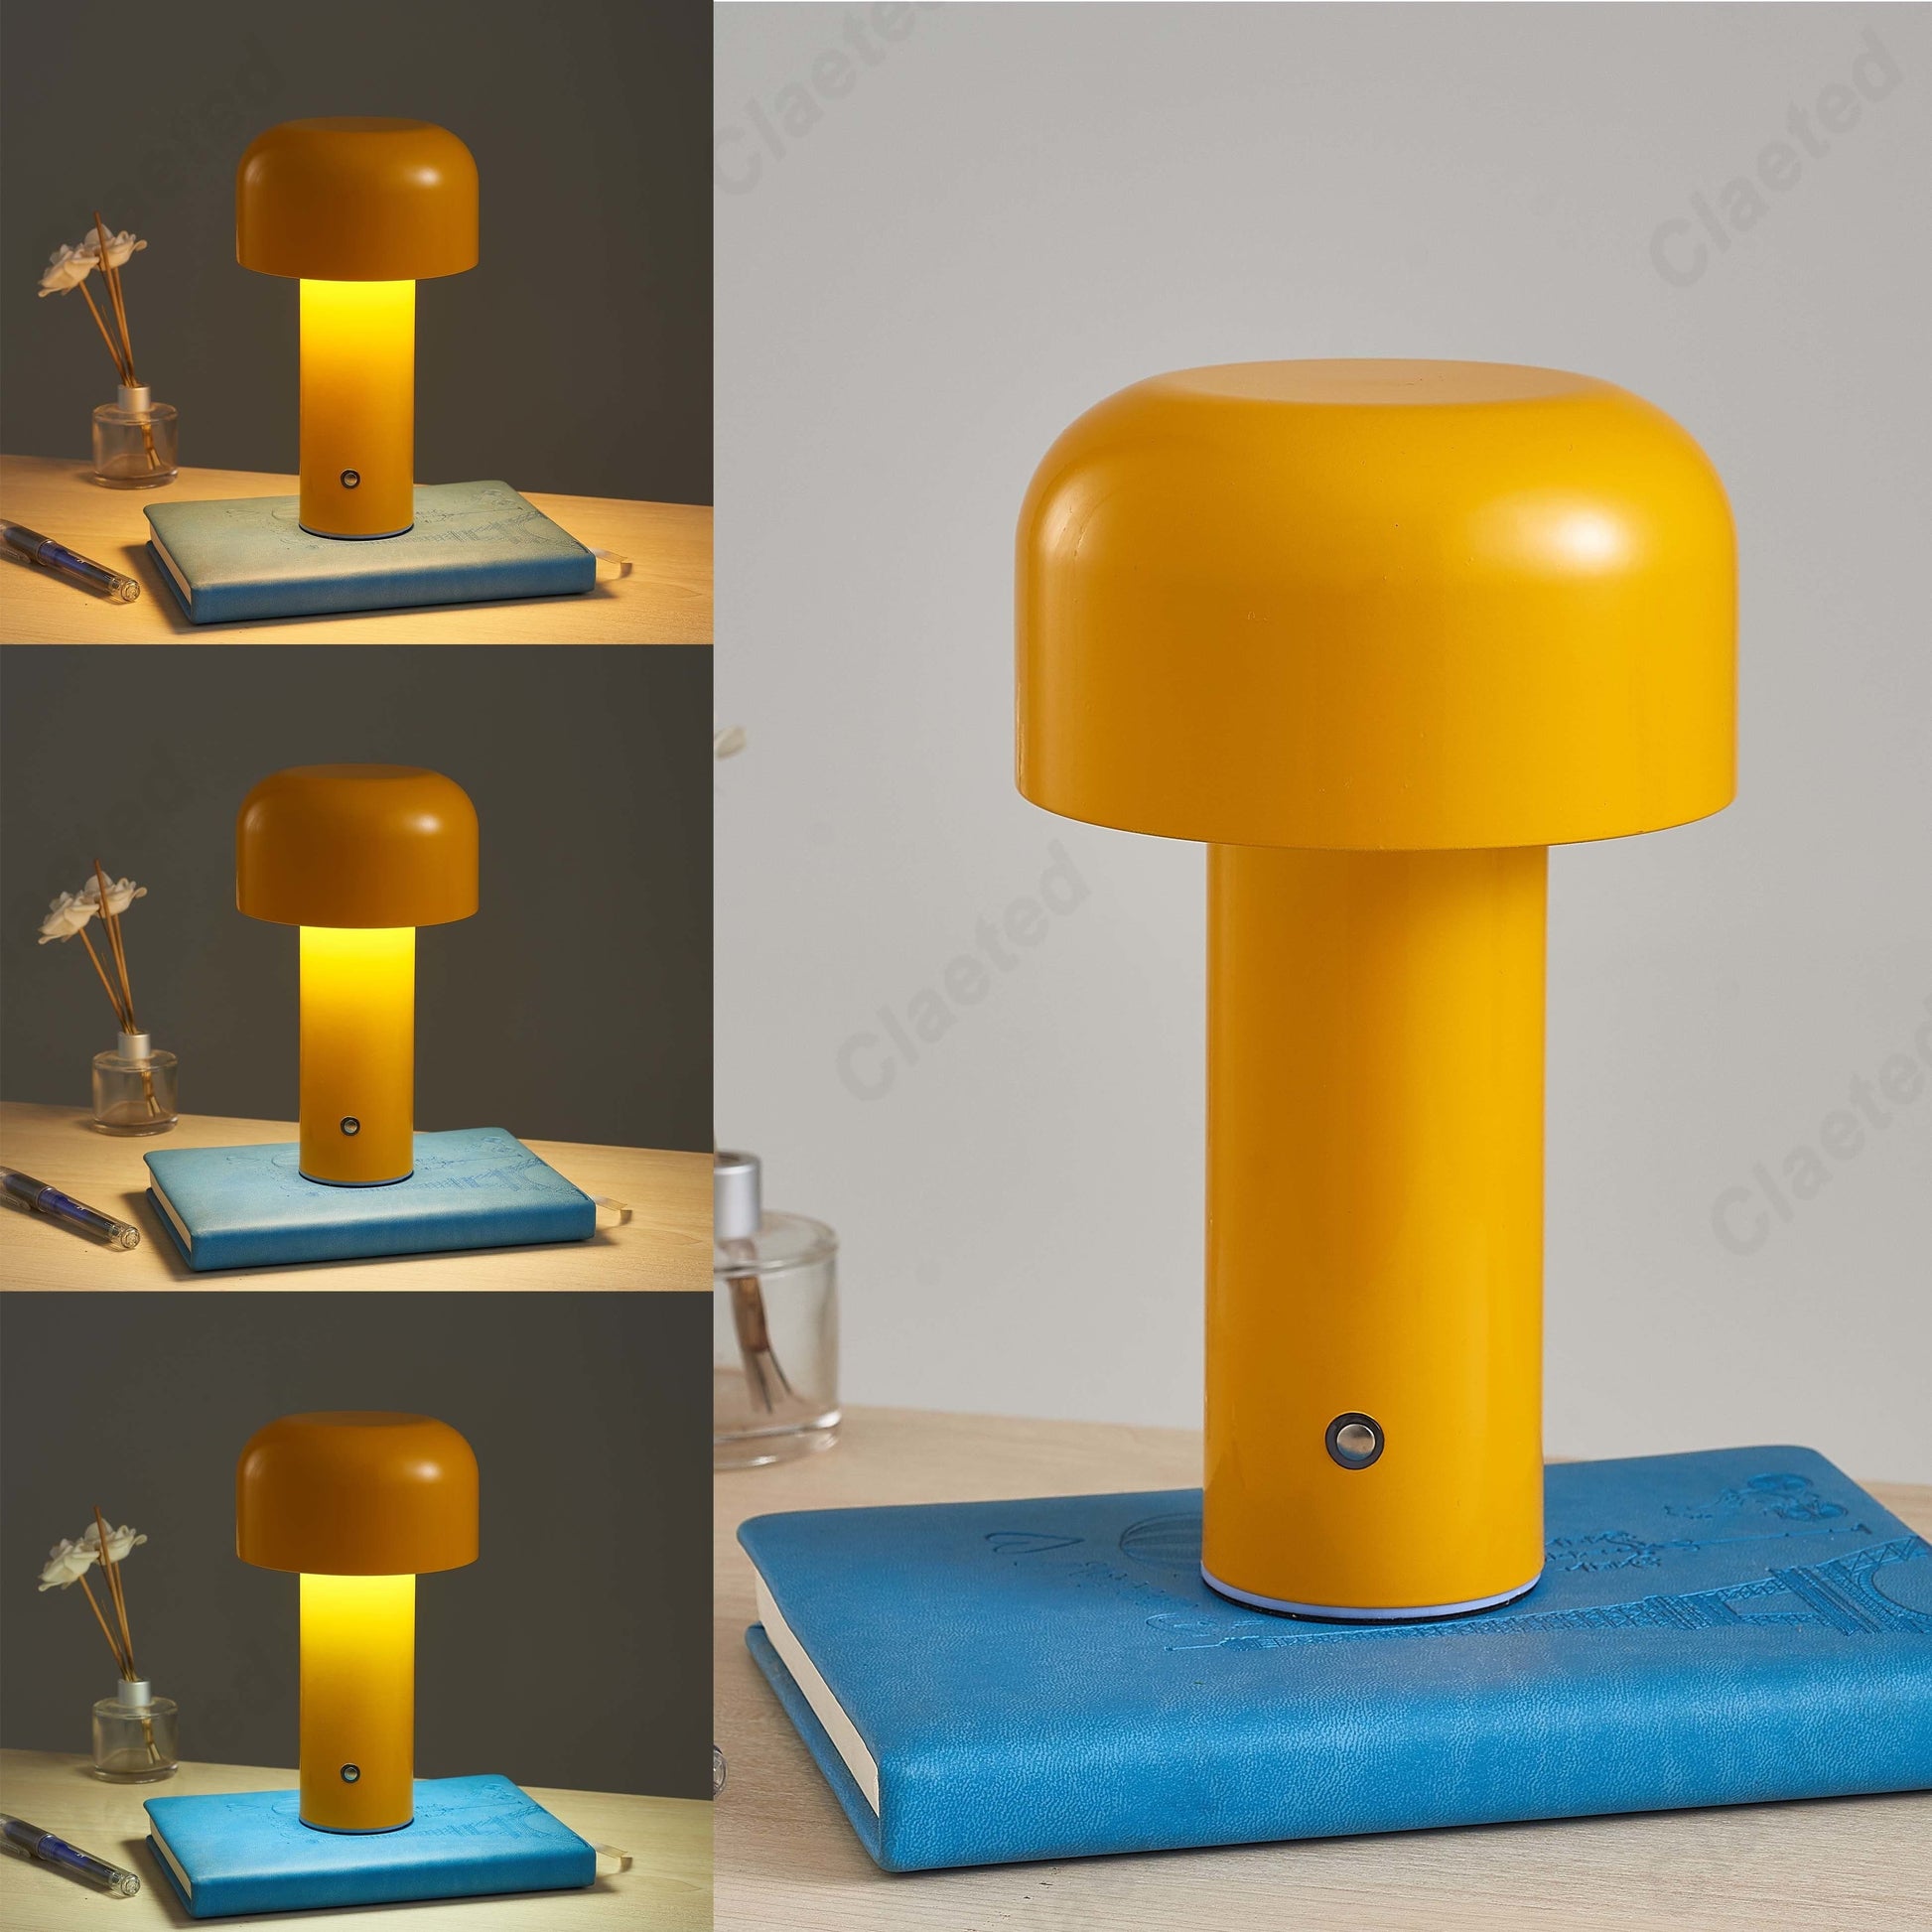 Home Finesse Mushroom Table Lamp - Rechargeable Decor Light